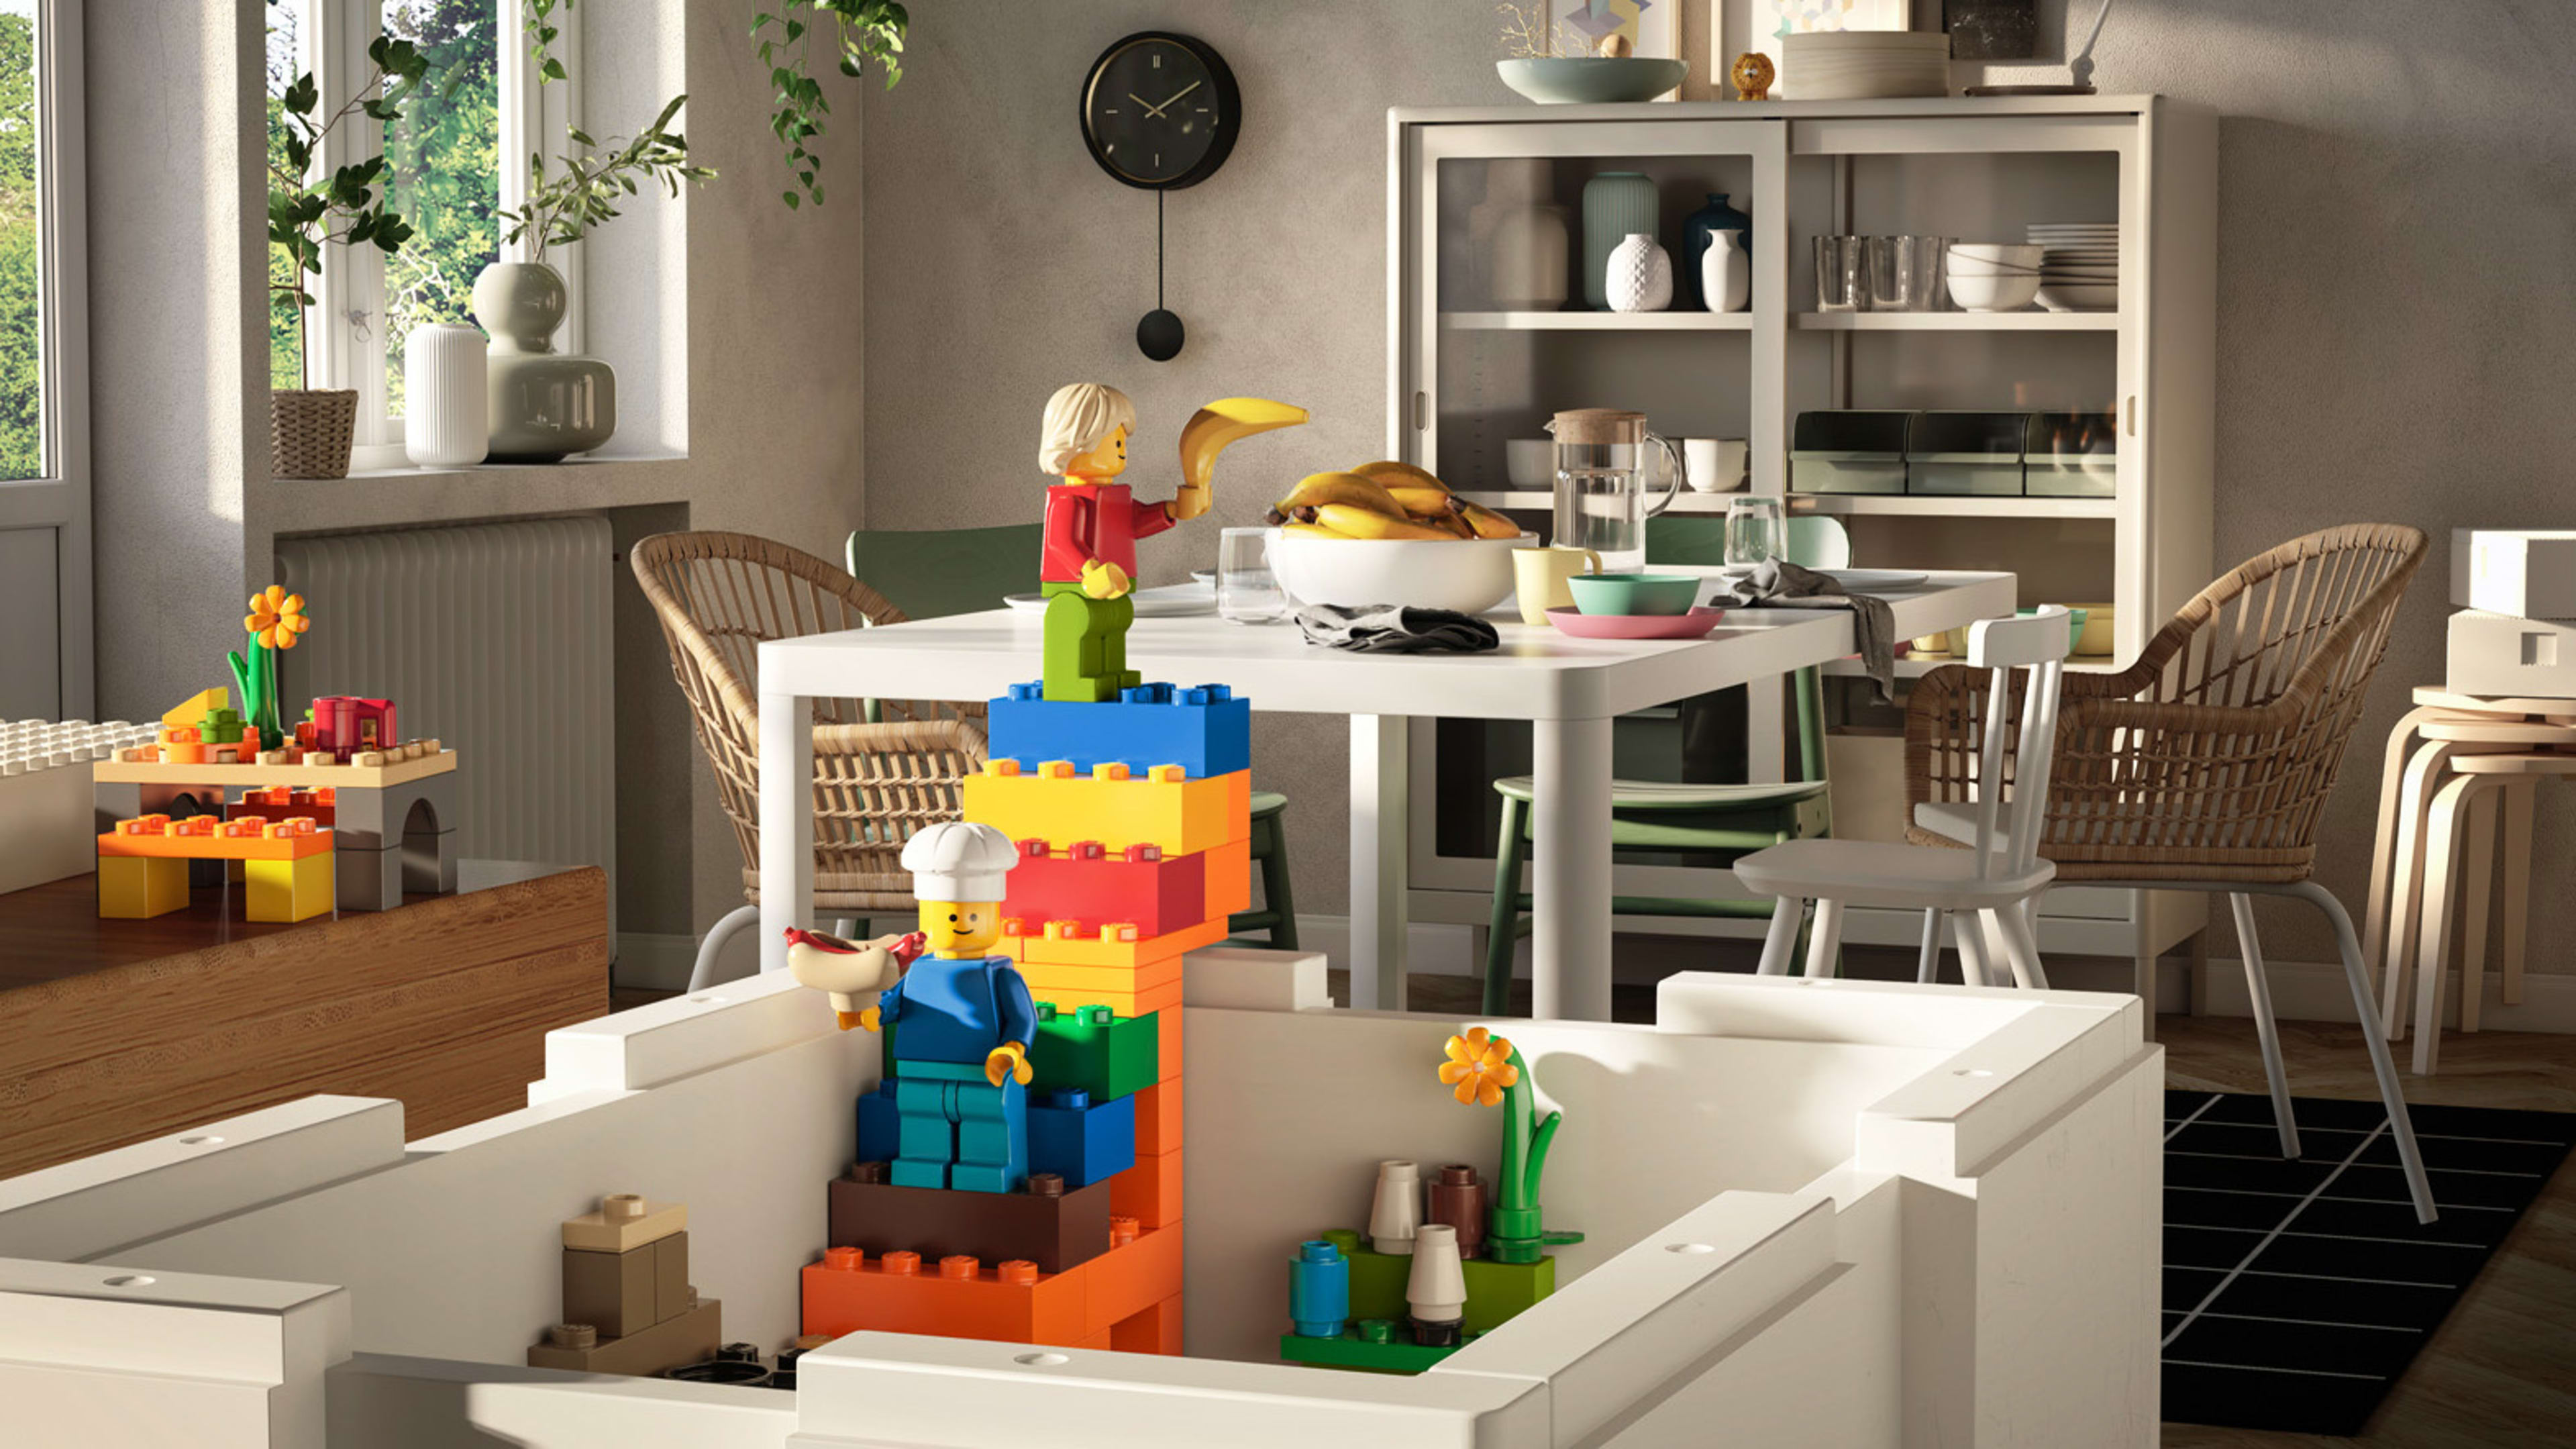 See Ikea’s first collaboration with Lego. It’s genius.